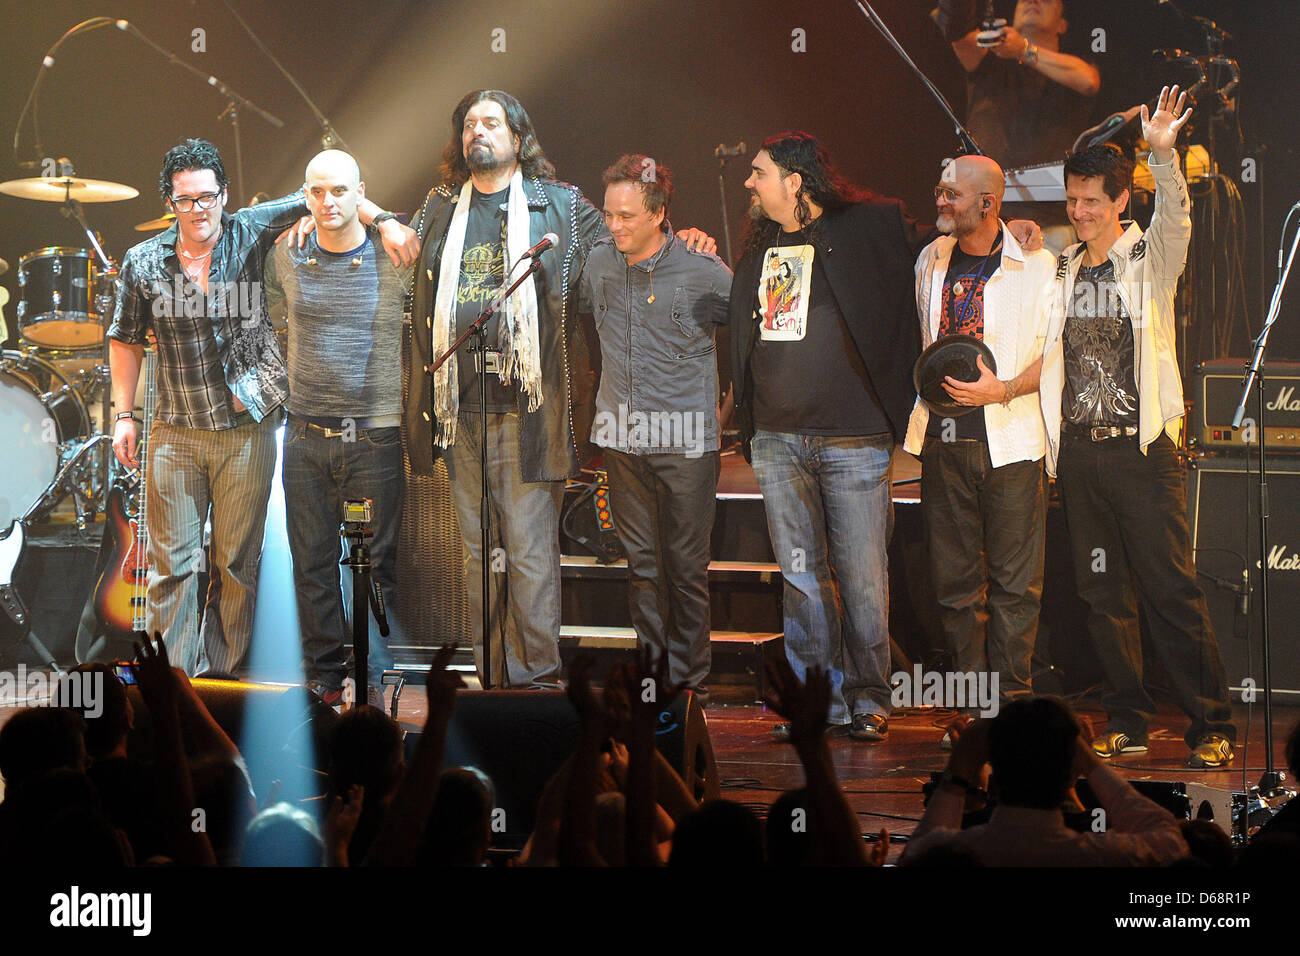 Danny Thompson, Guy Erez, Alan Parsons, Paul Josef Olsson, Alastair Greene, Todd Cooper and Tom Brooks from The Alan Parsons Live Project - Tour 2012 stand after their performance in Circus Krone in Munich, Germany, 19 July 2012. Photo: Revierfoto Stock Photo